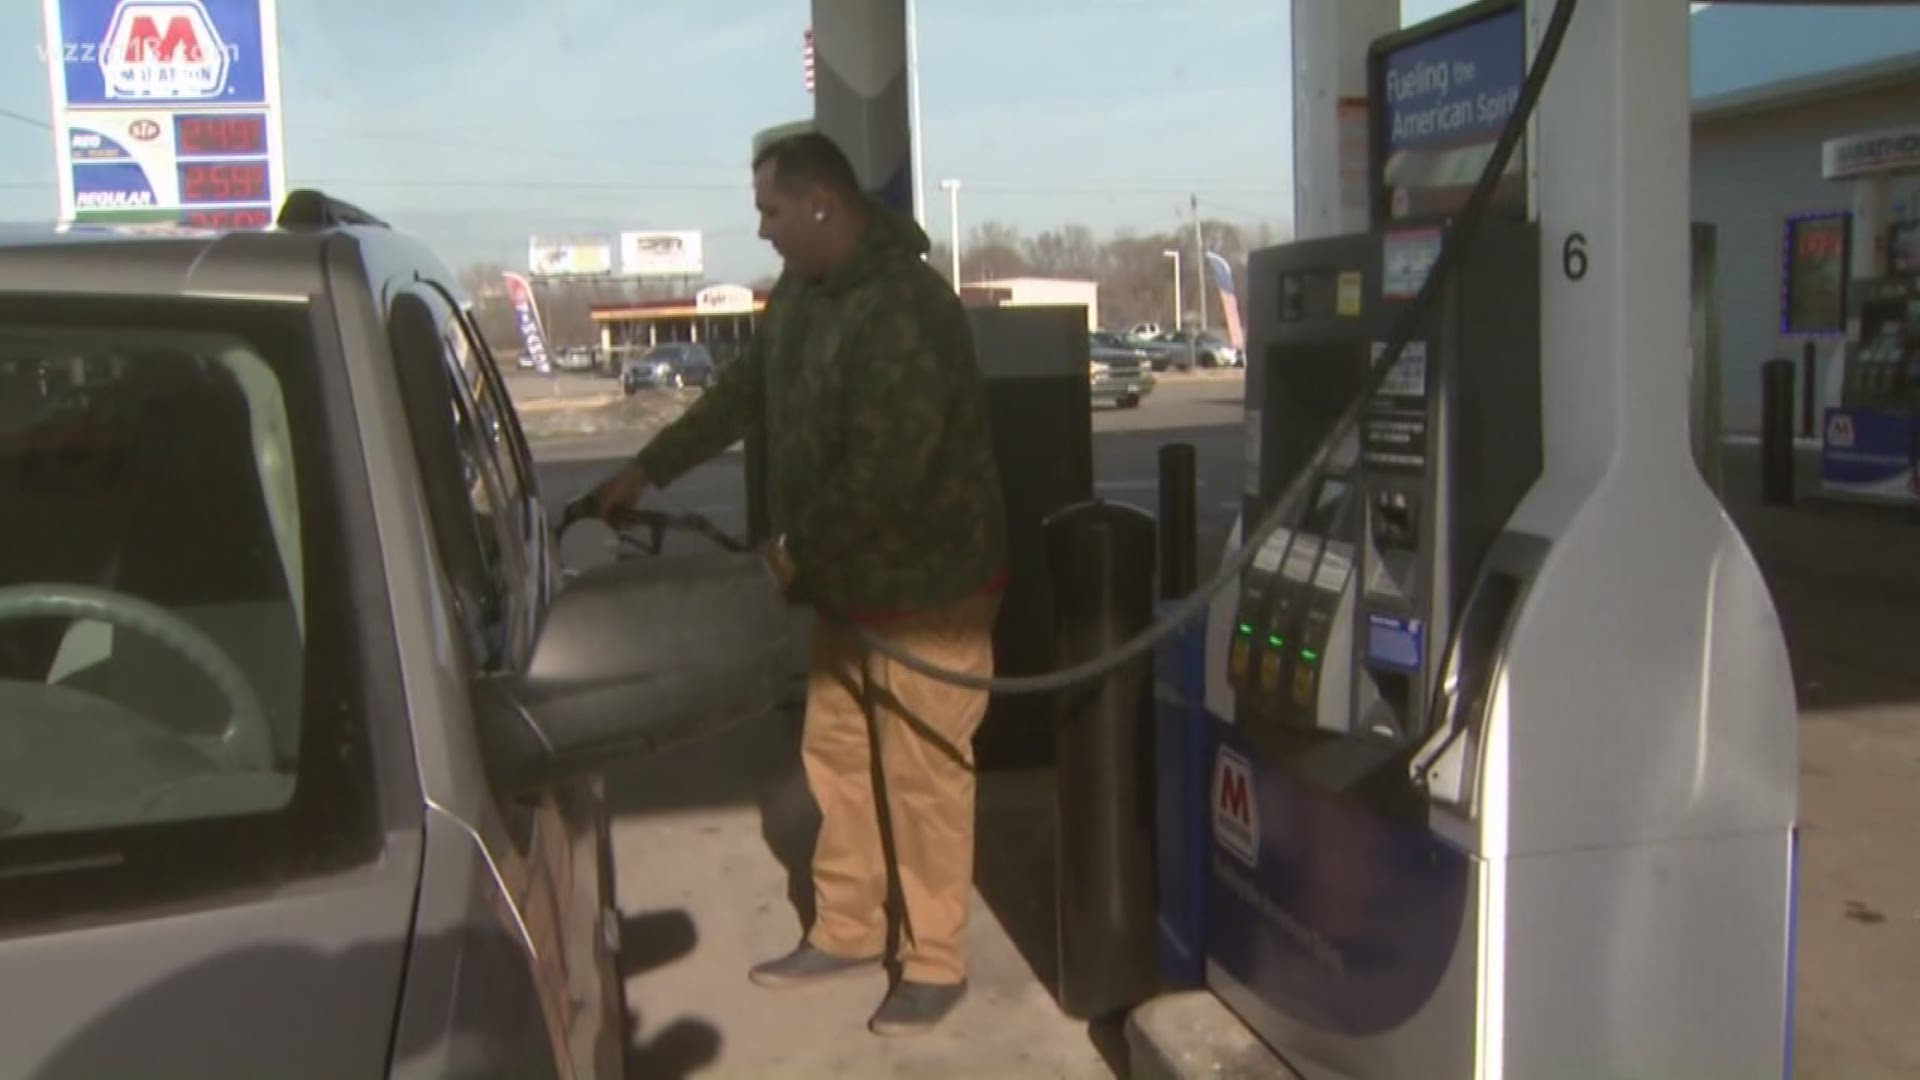 Gas prices aren't going up